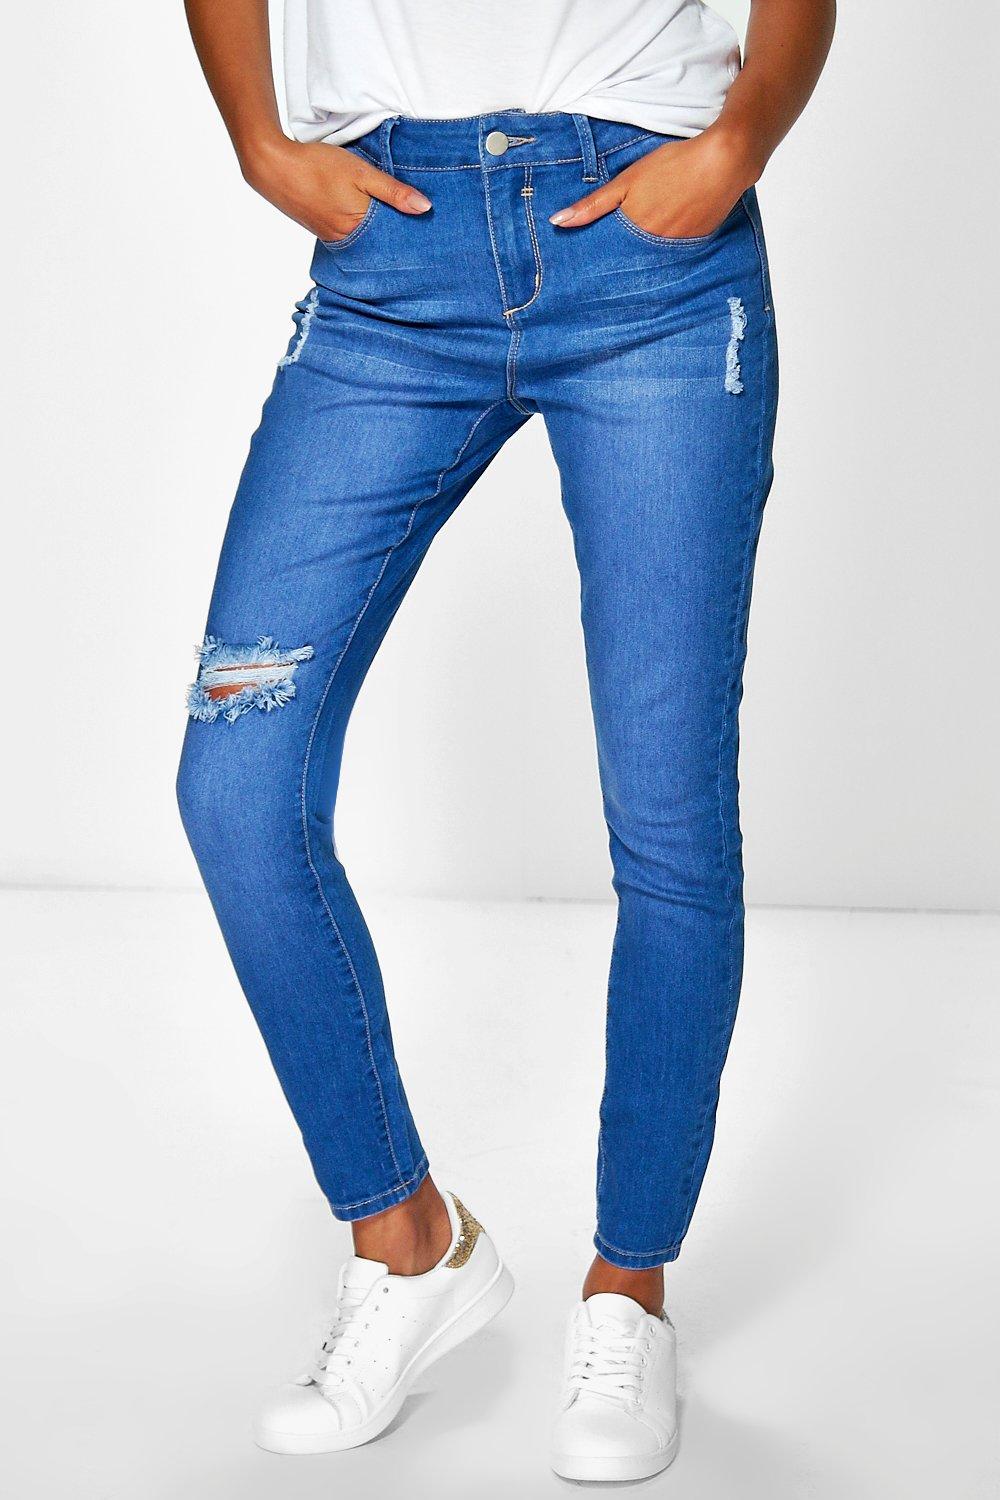 bright blue ripped skinny jeans